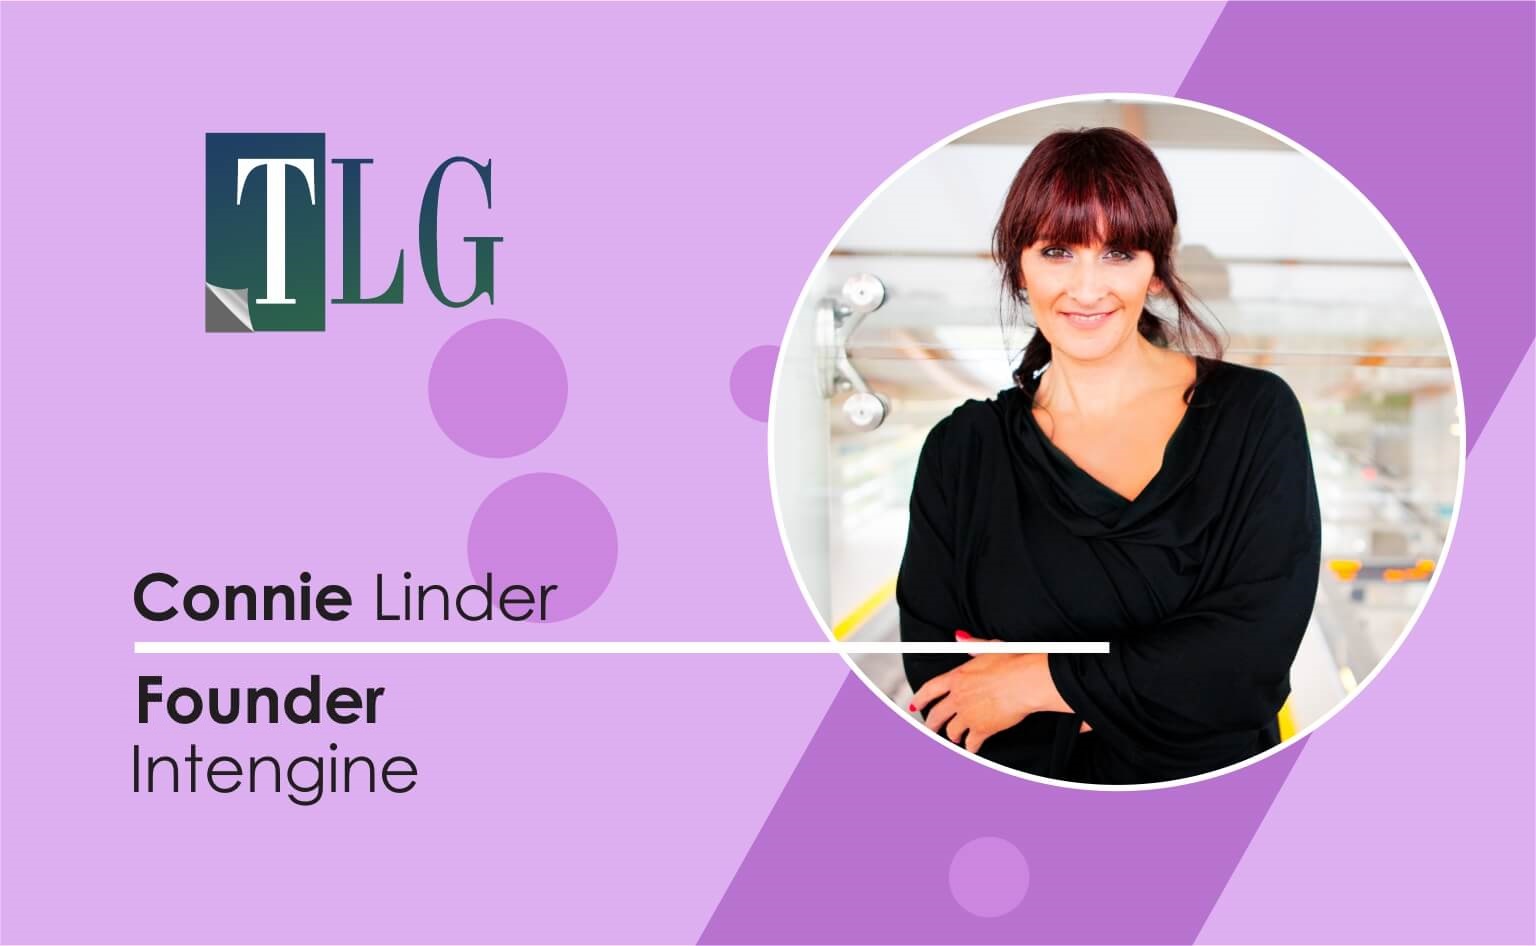 Connie Linder: An Innovative Thought Leader Contributing to Global Sustainable Development